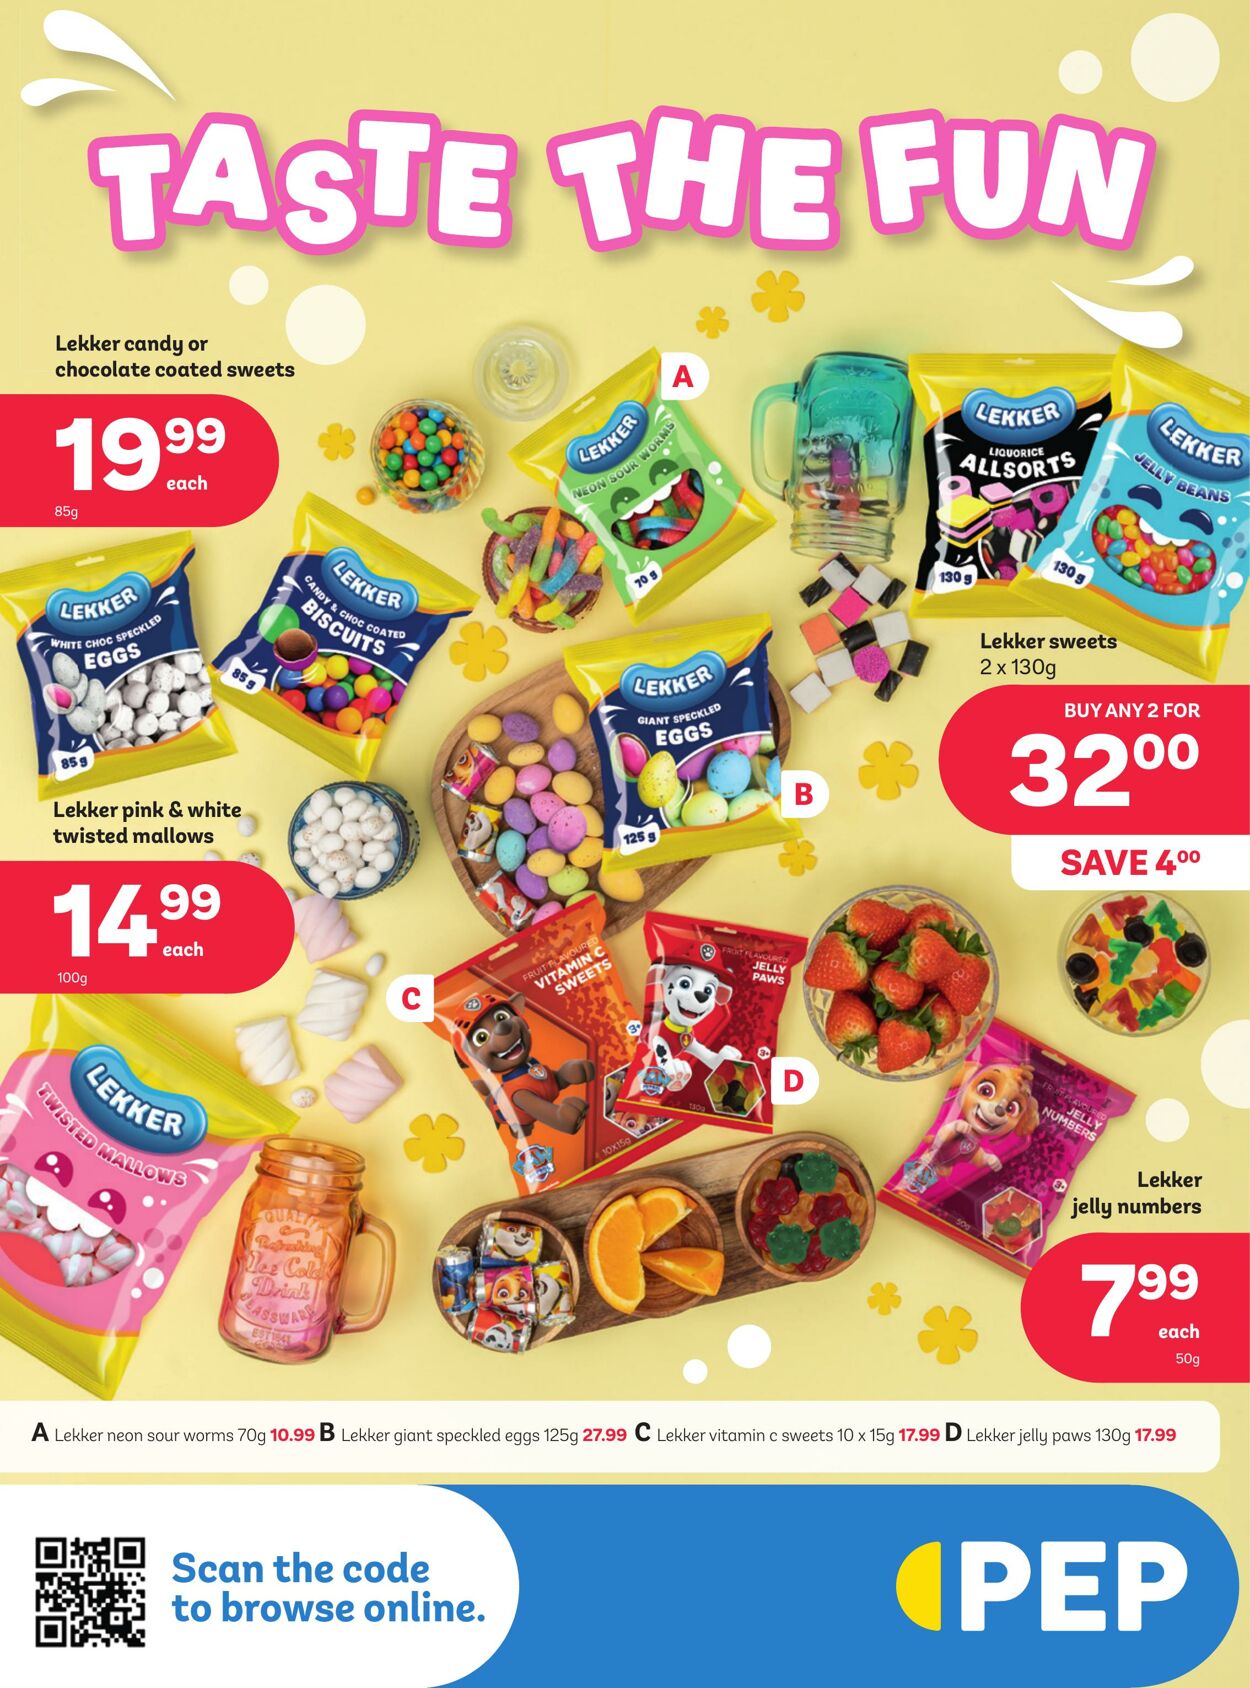 Pep Stores Promotional specials